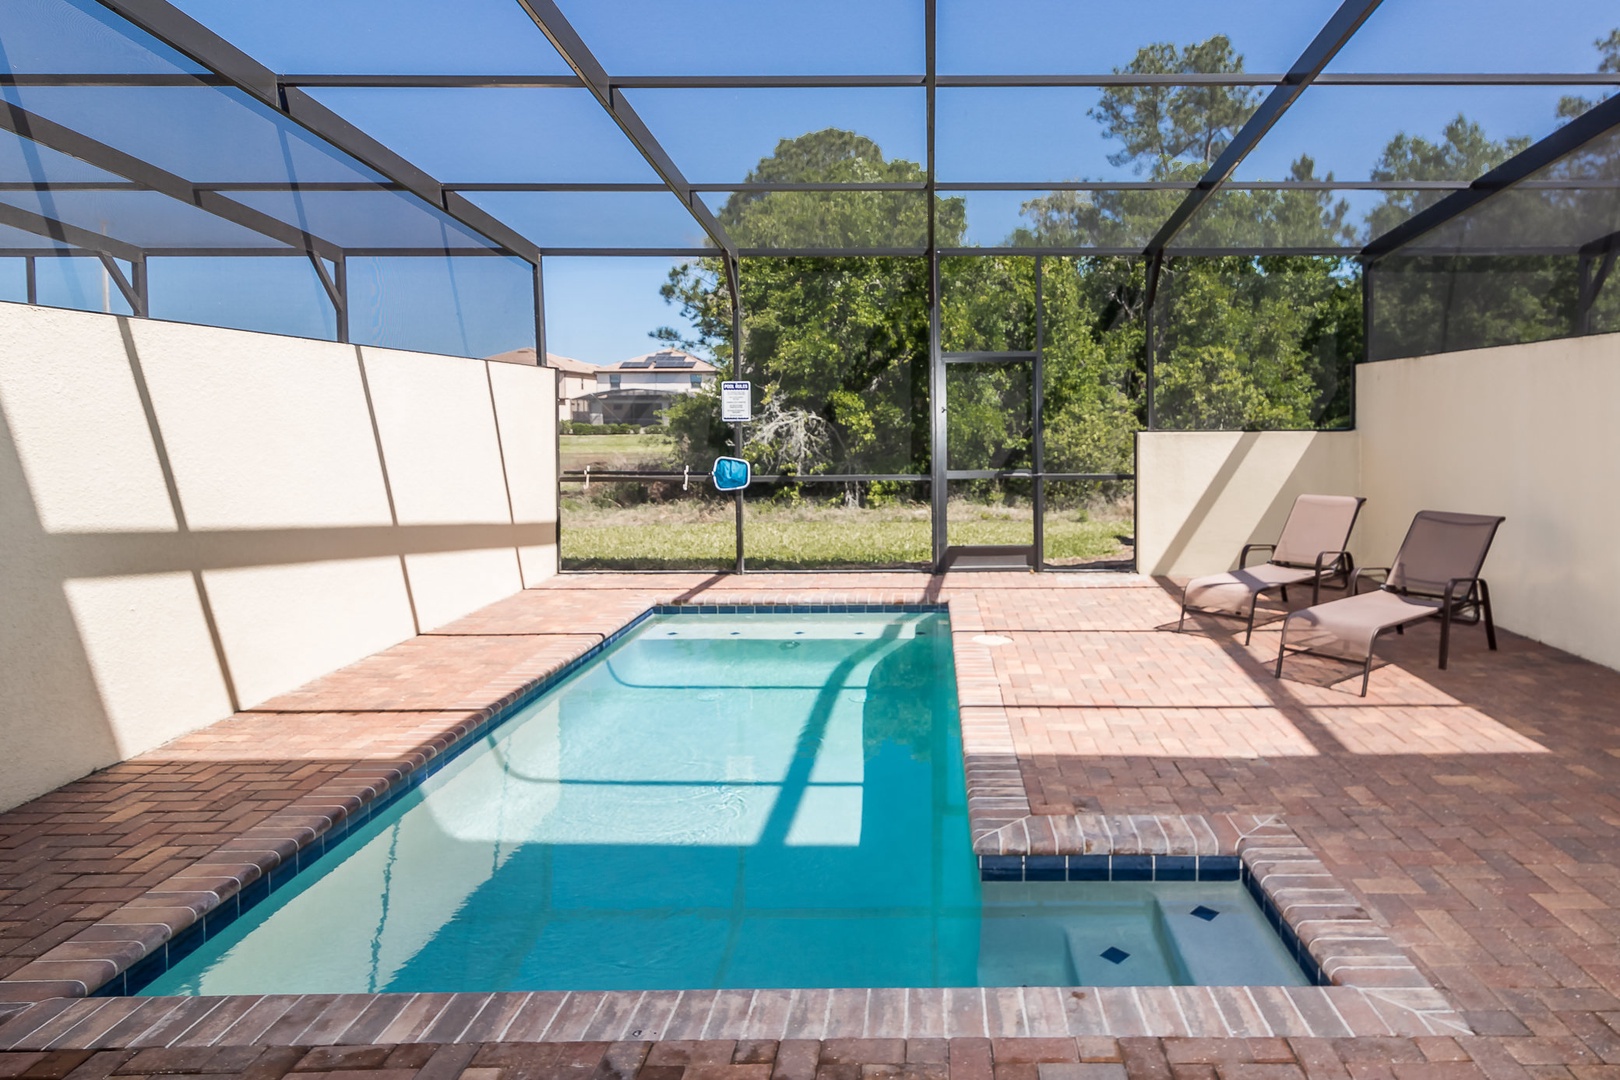 Gated pool with outdoor seating